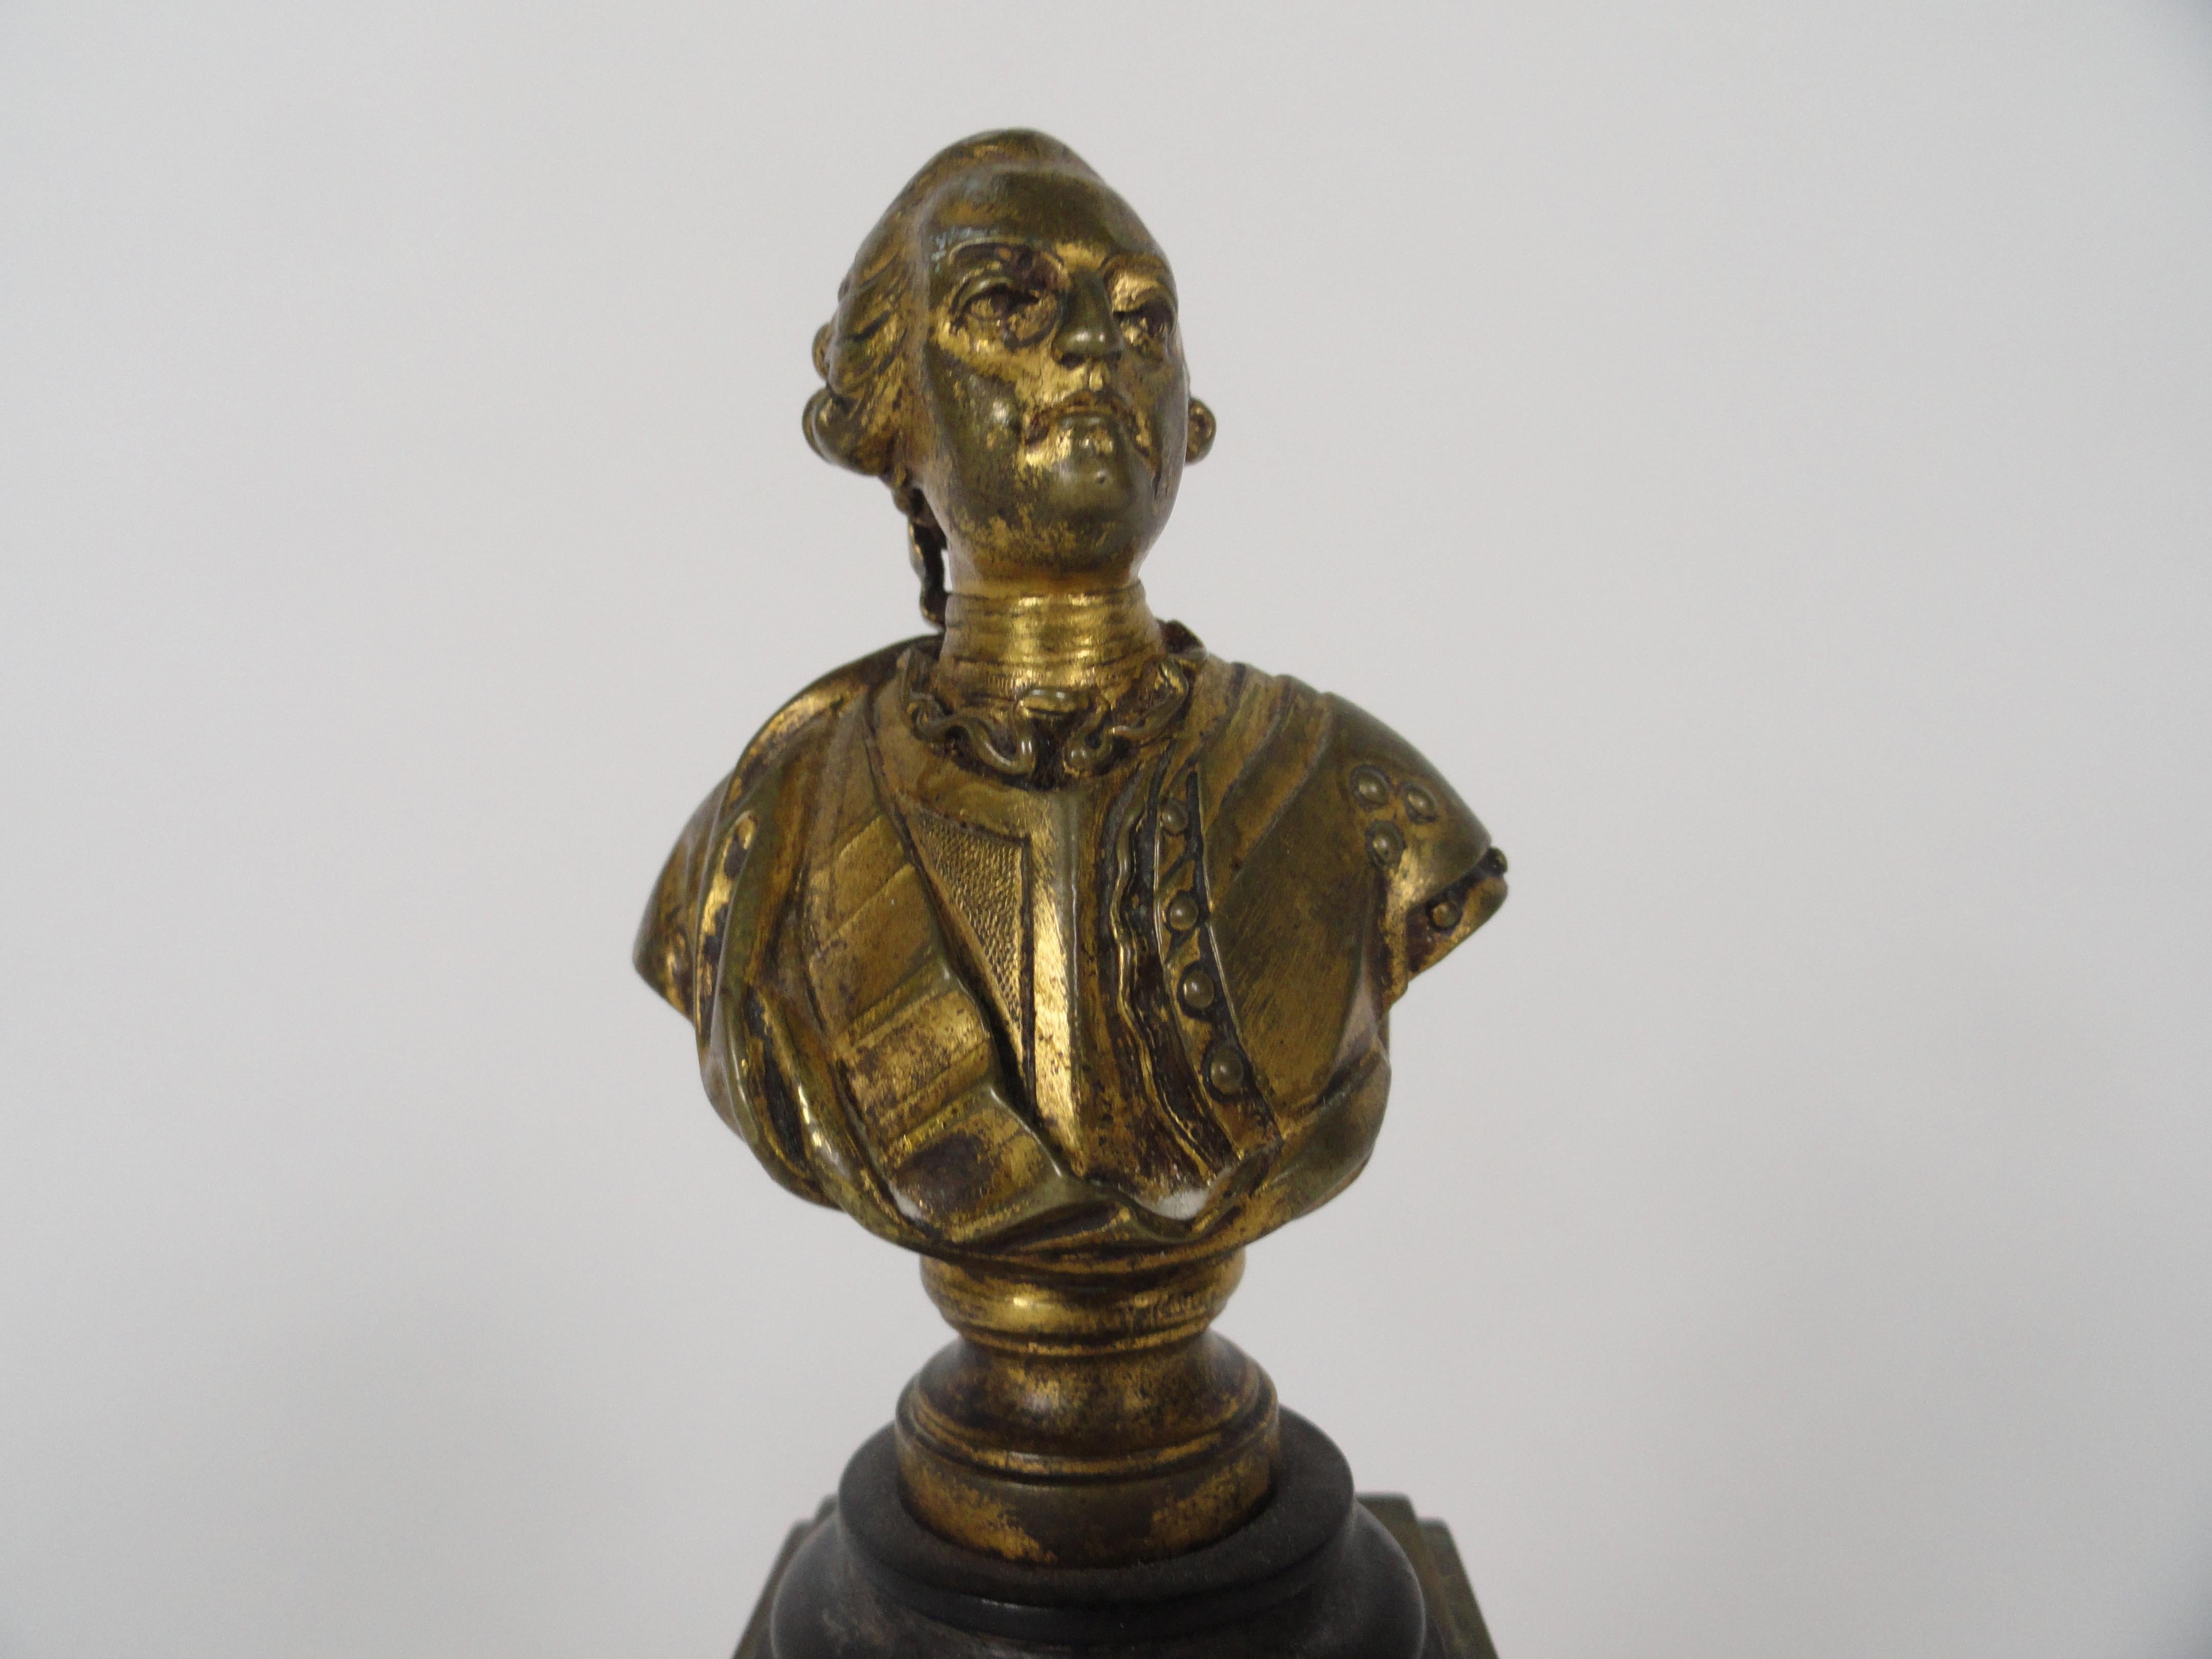 19th century neoclassical style bronze bust of Louis XVI on a black marble base.